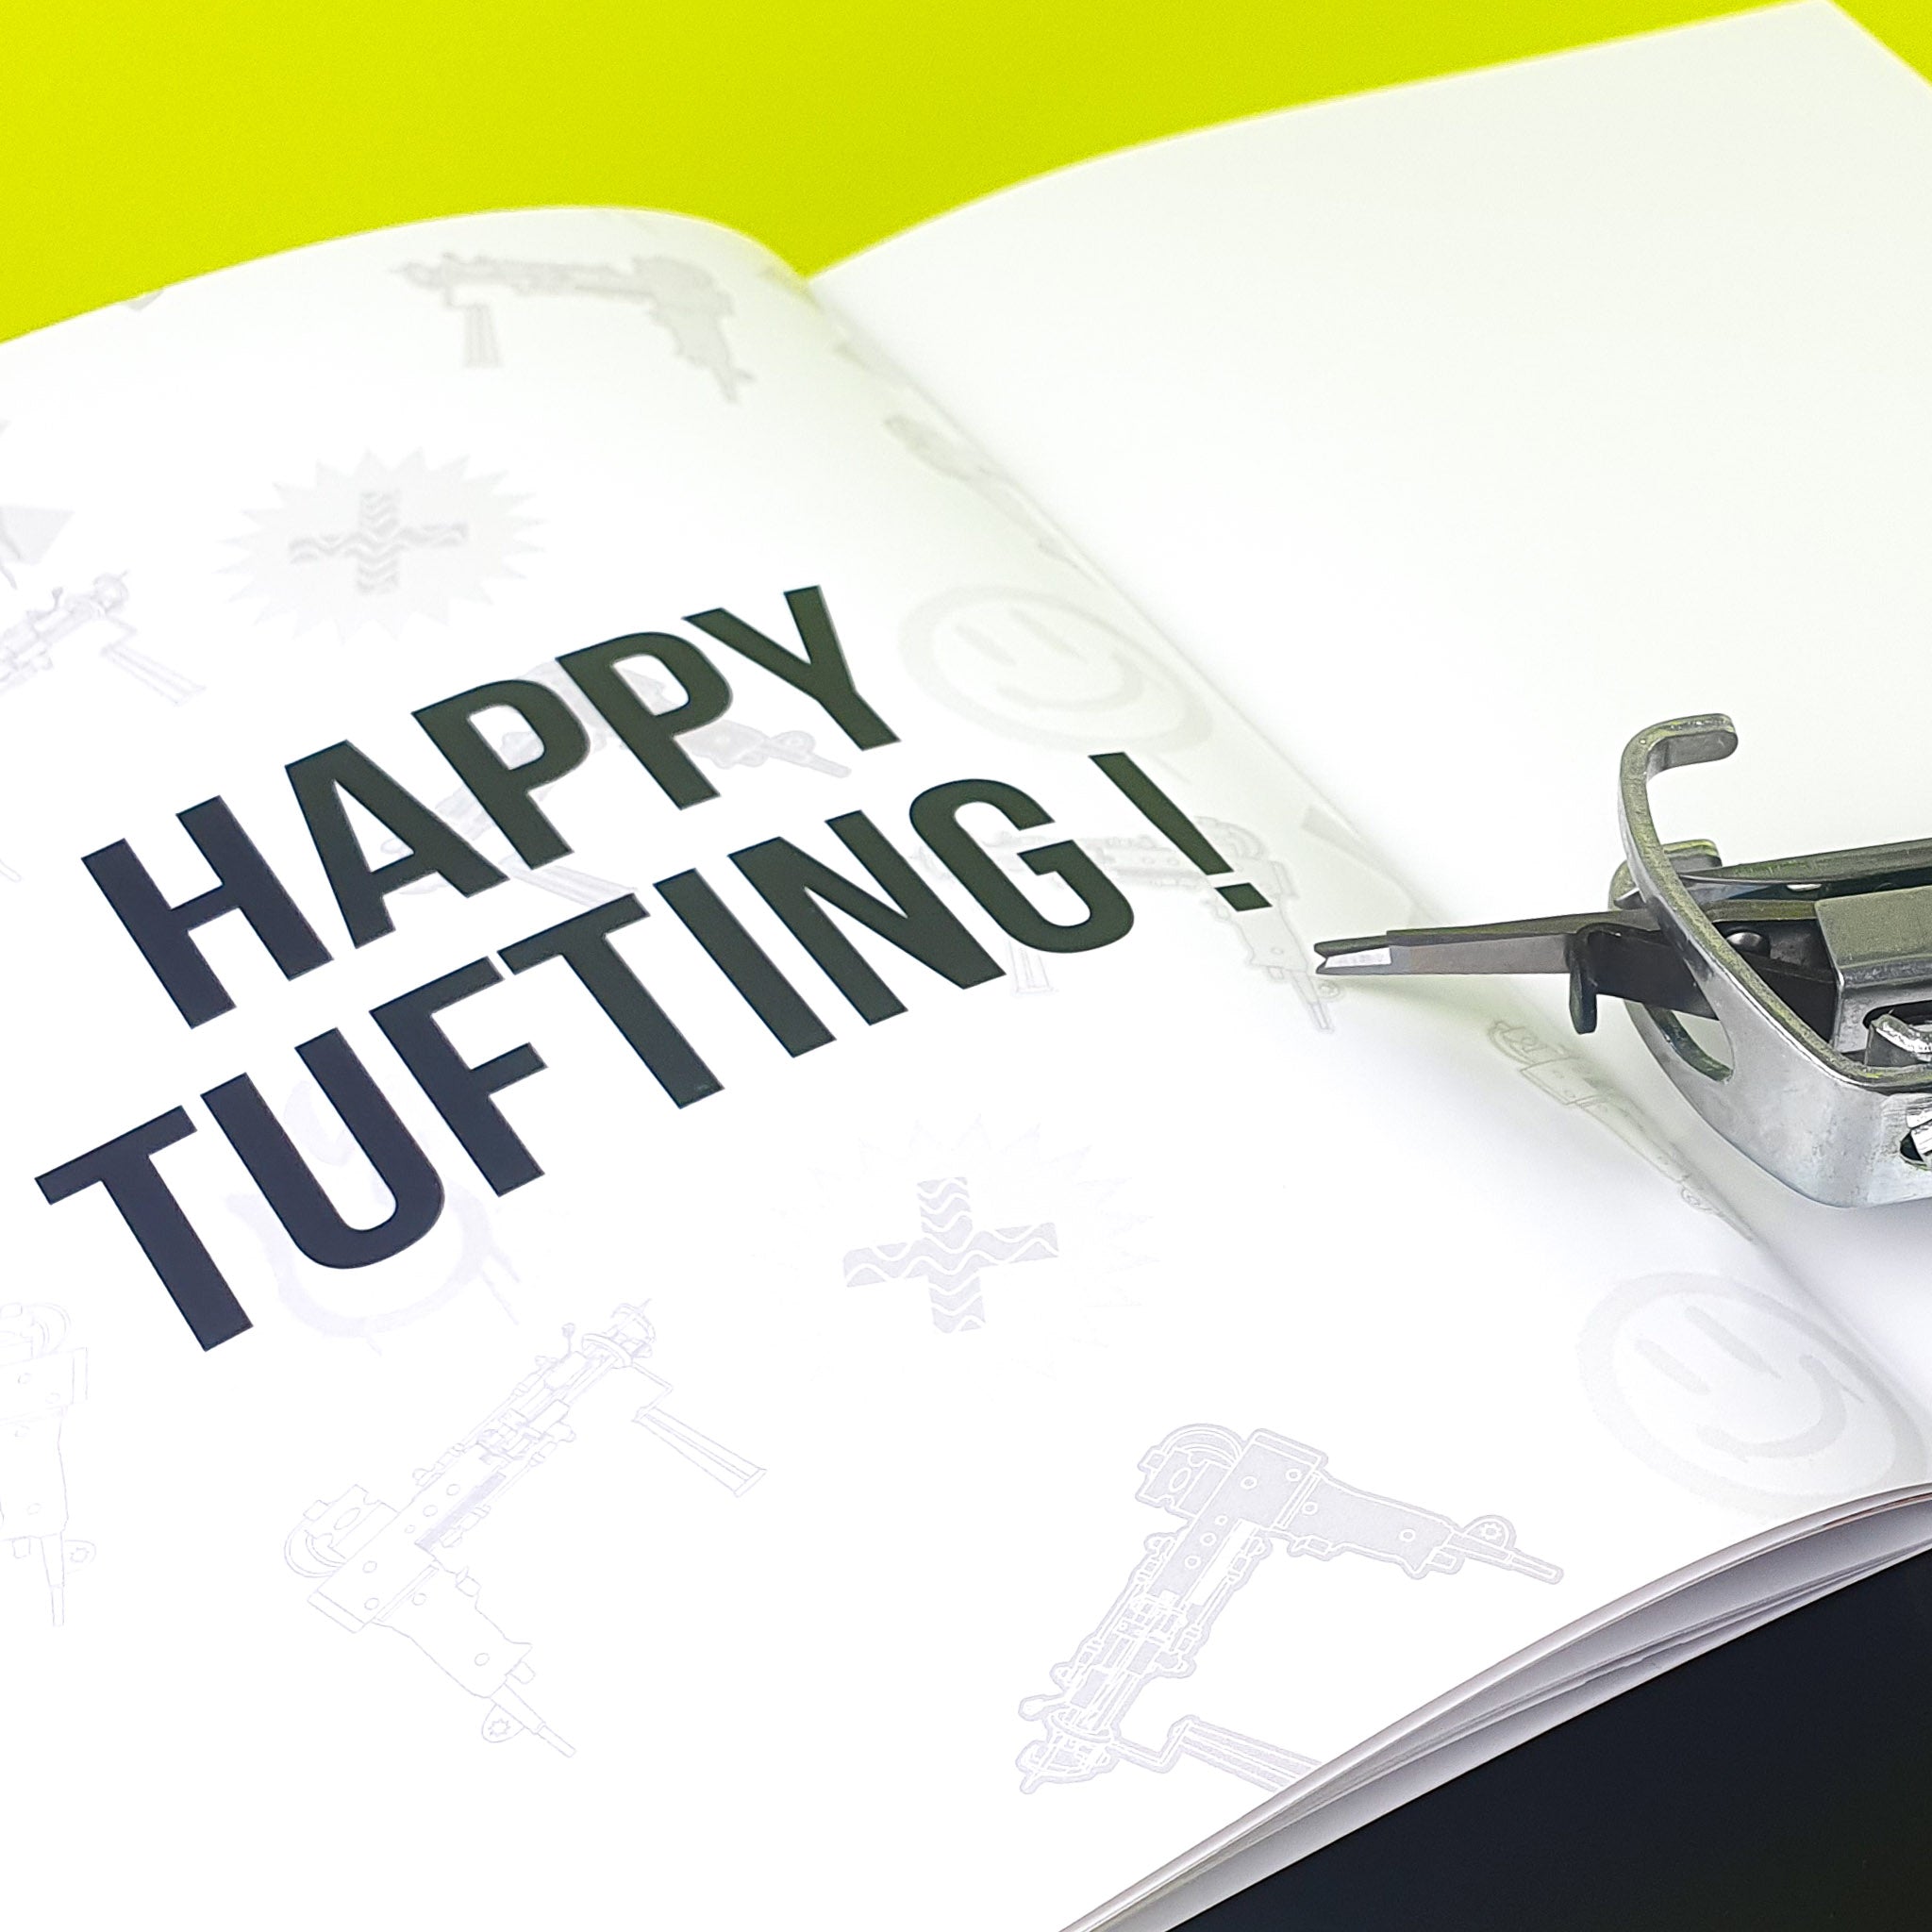 Close up of the Tuftbox AK-I tufting machine manual which reads "HAPPY TUFTING!" 